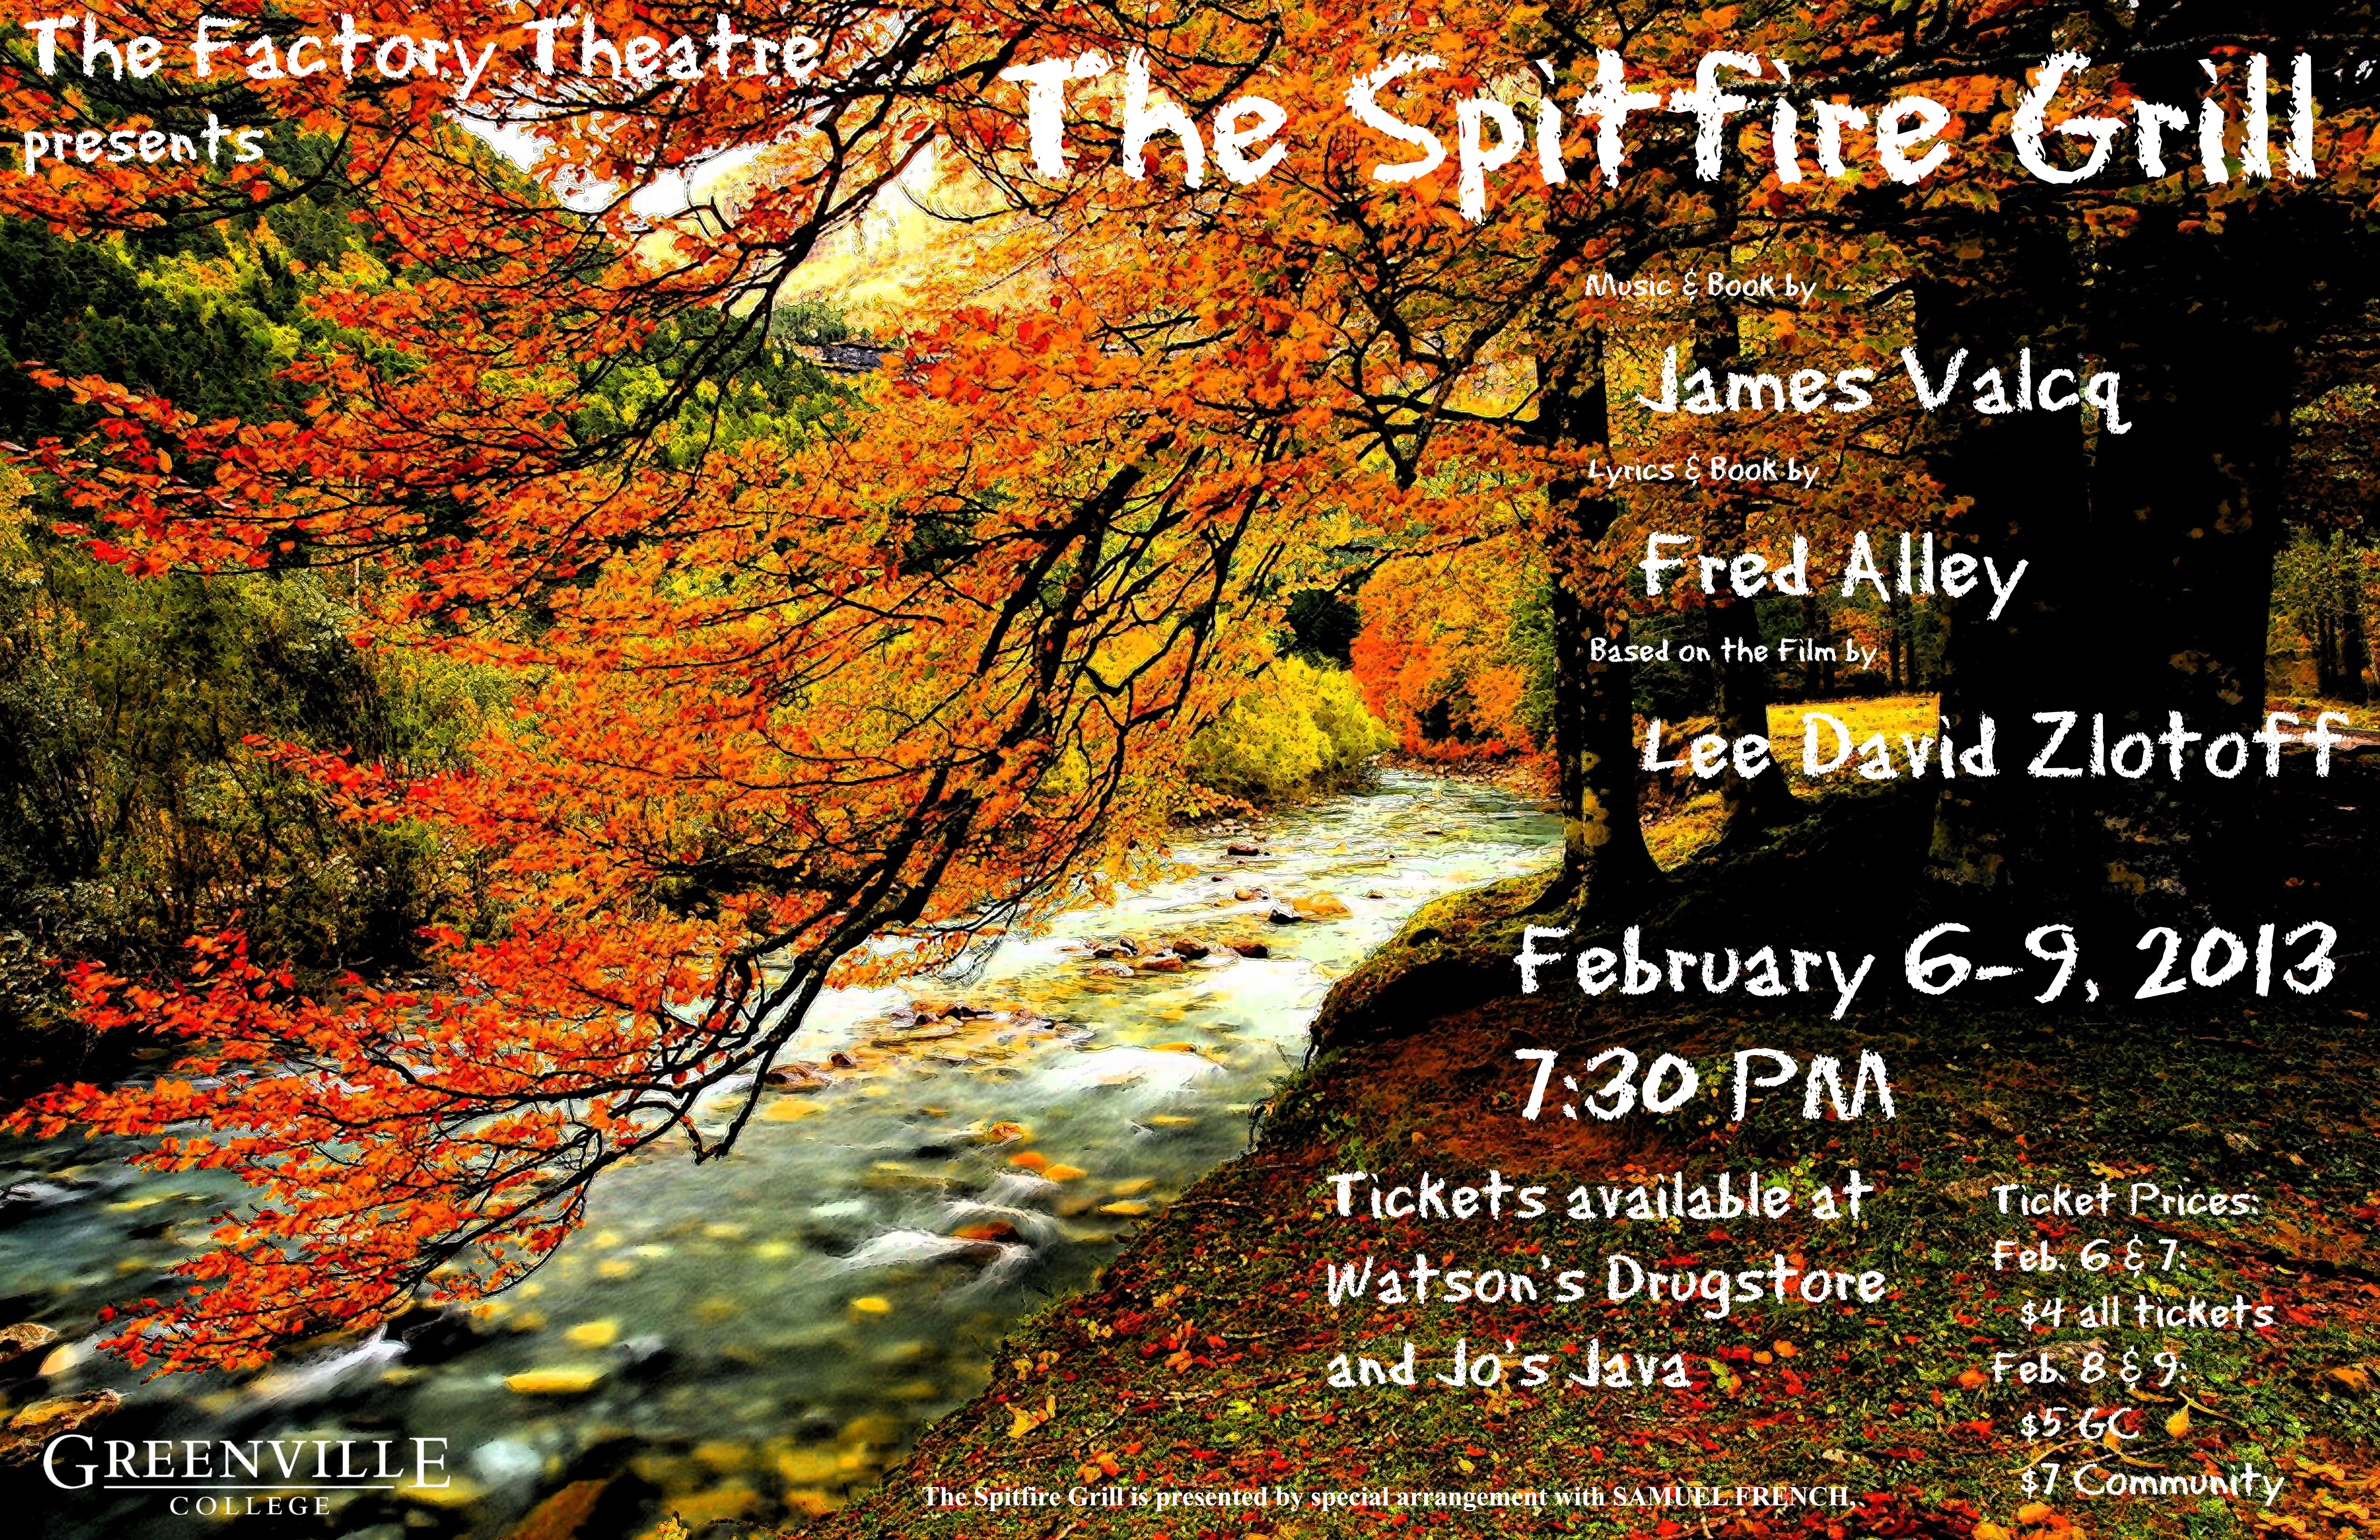 The Spitfire Grill Opens Soon at the Factory Theatre